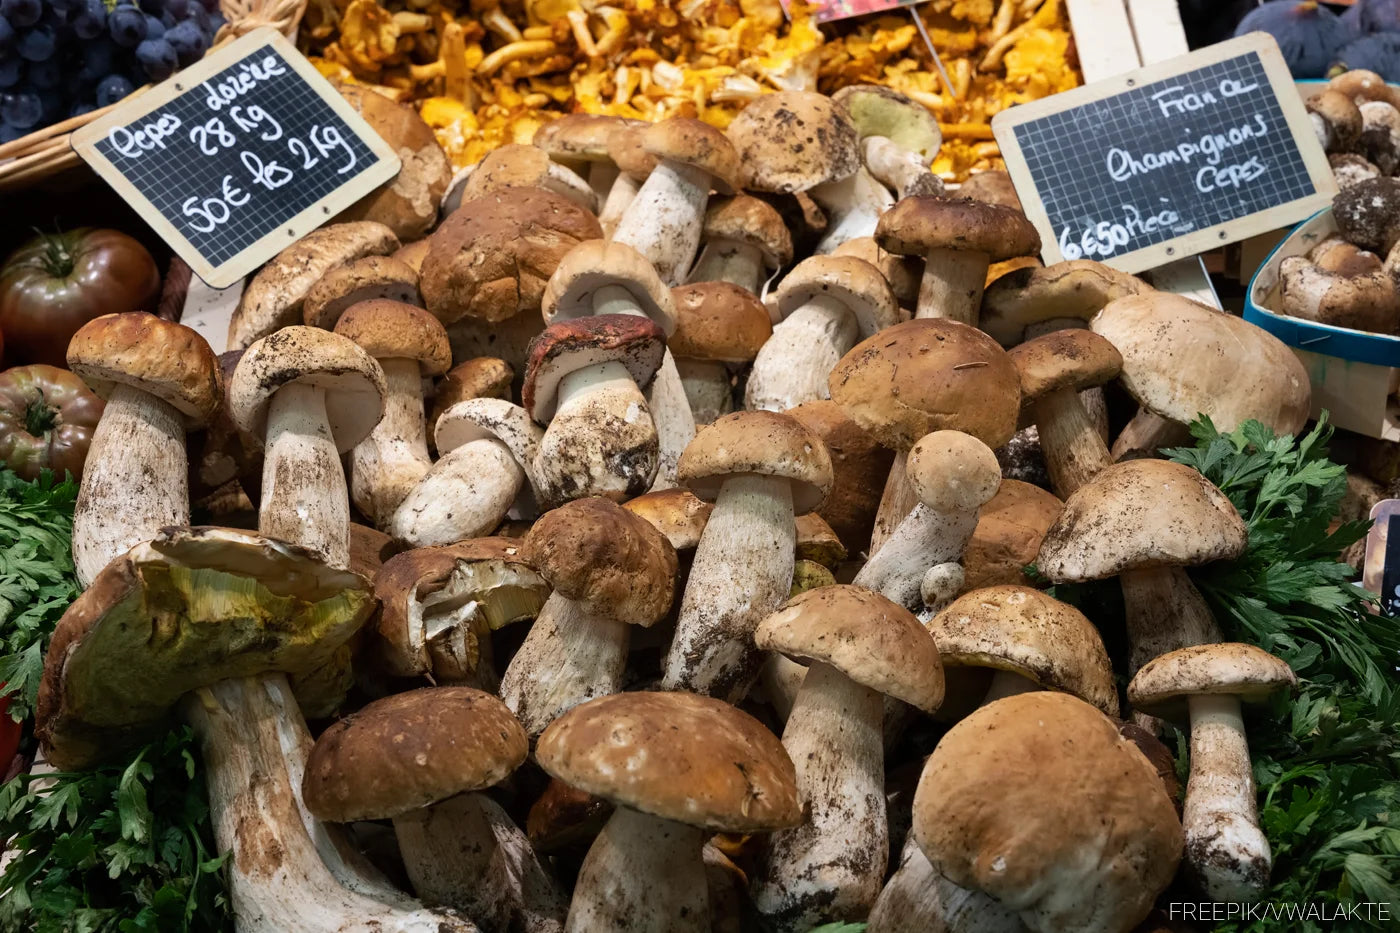 Mushrooms being sold in a market